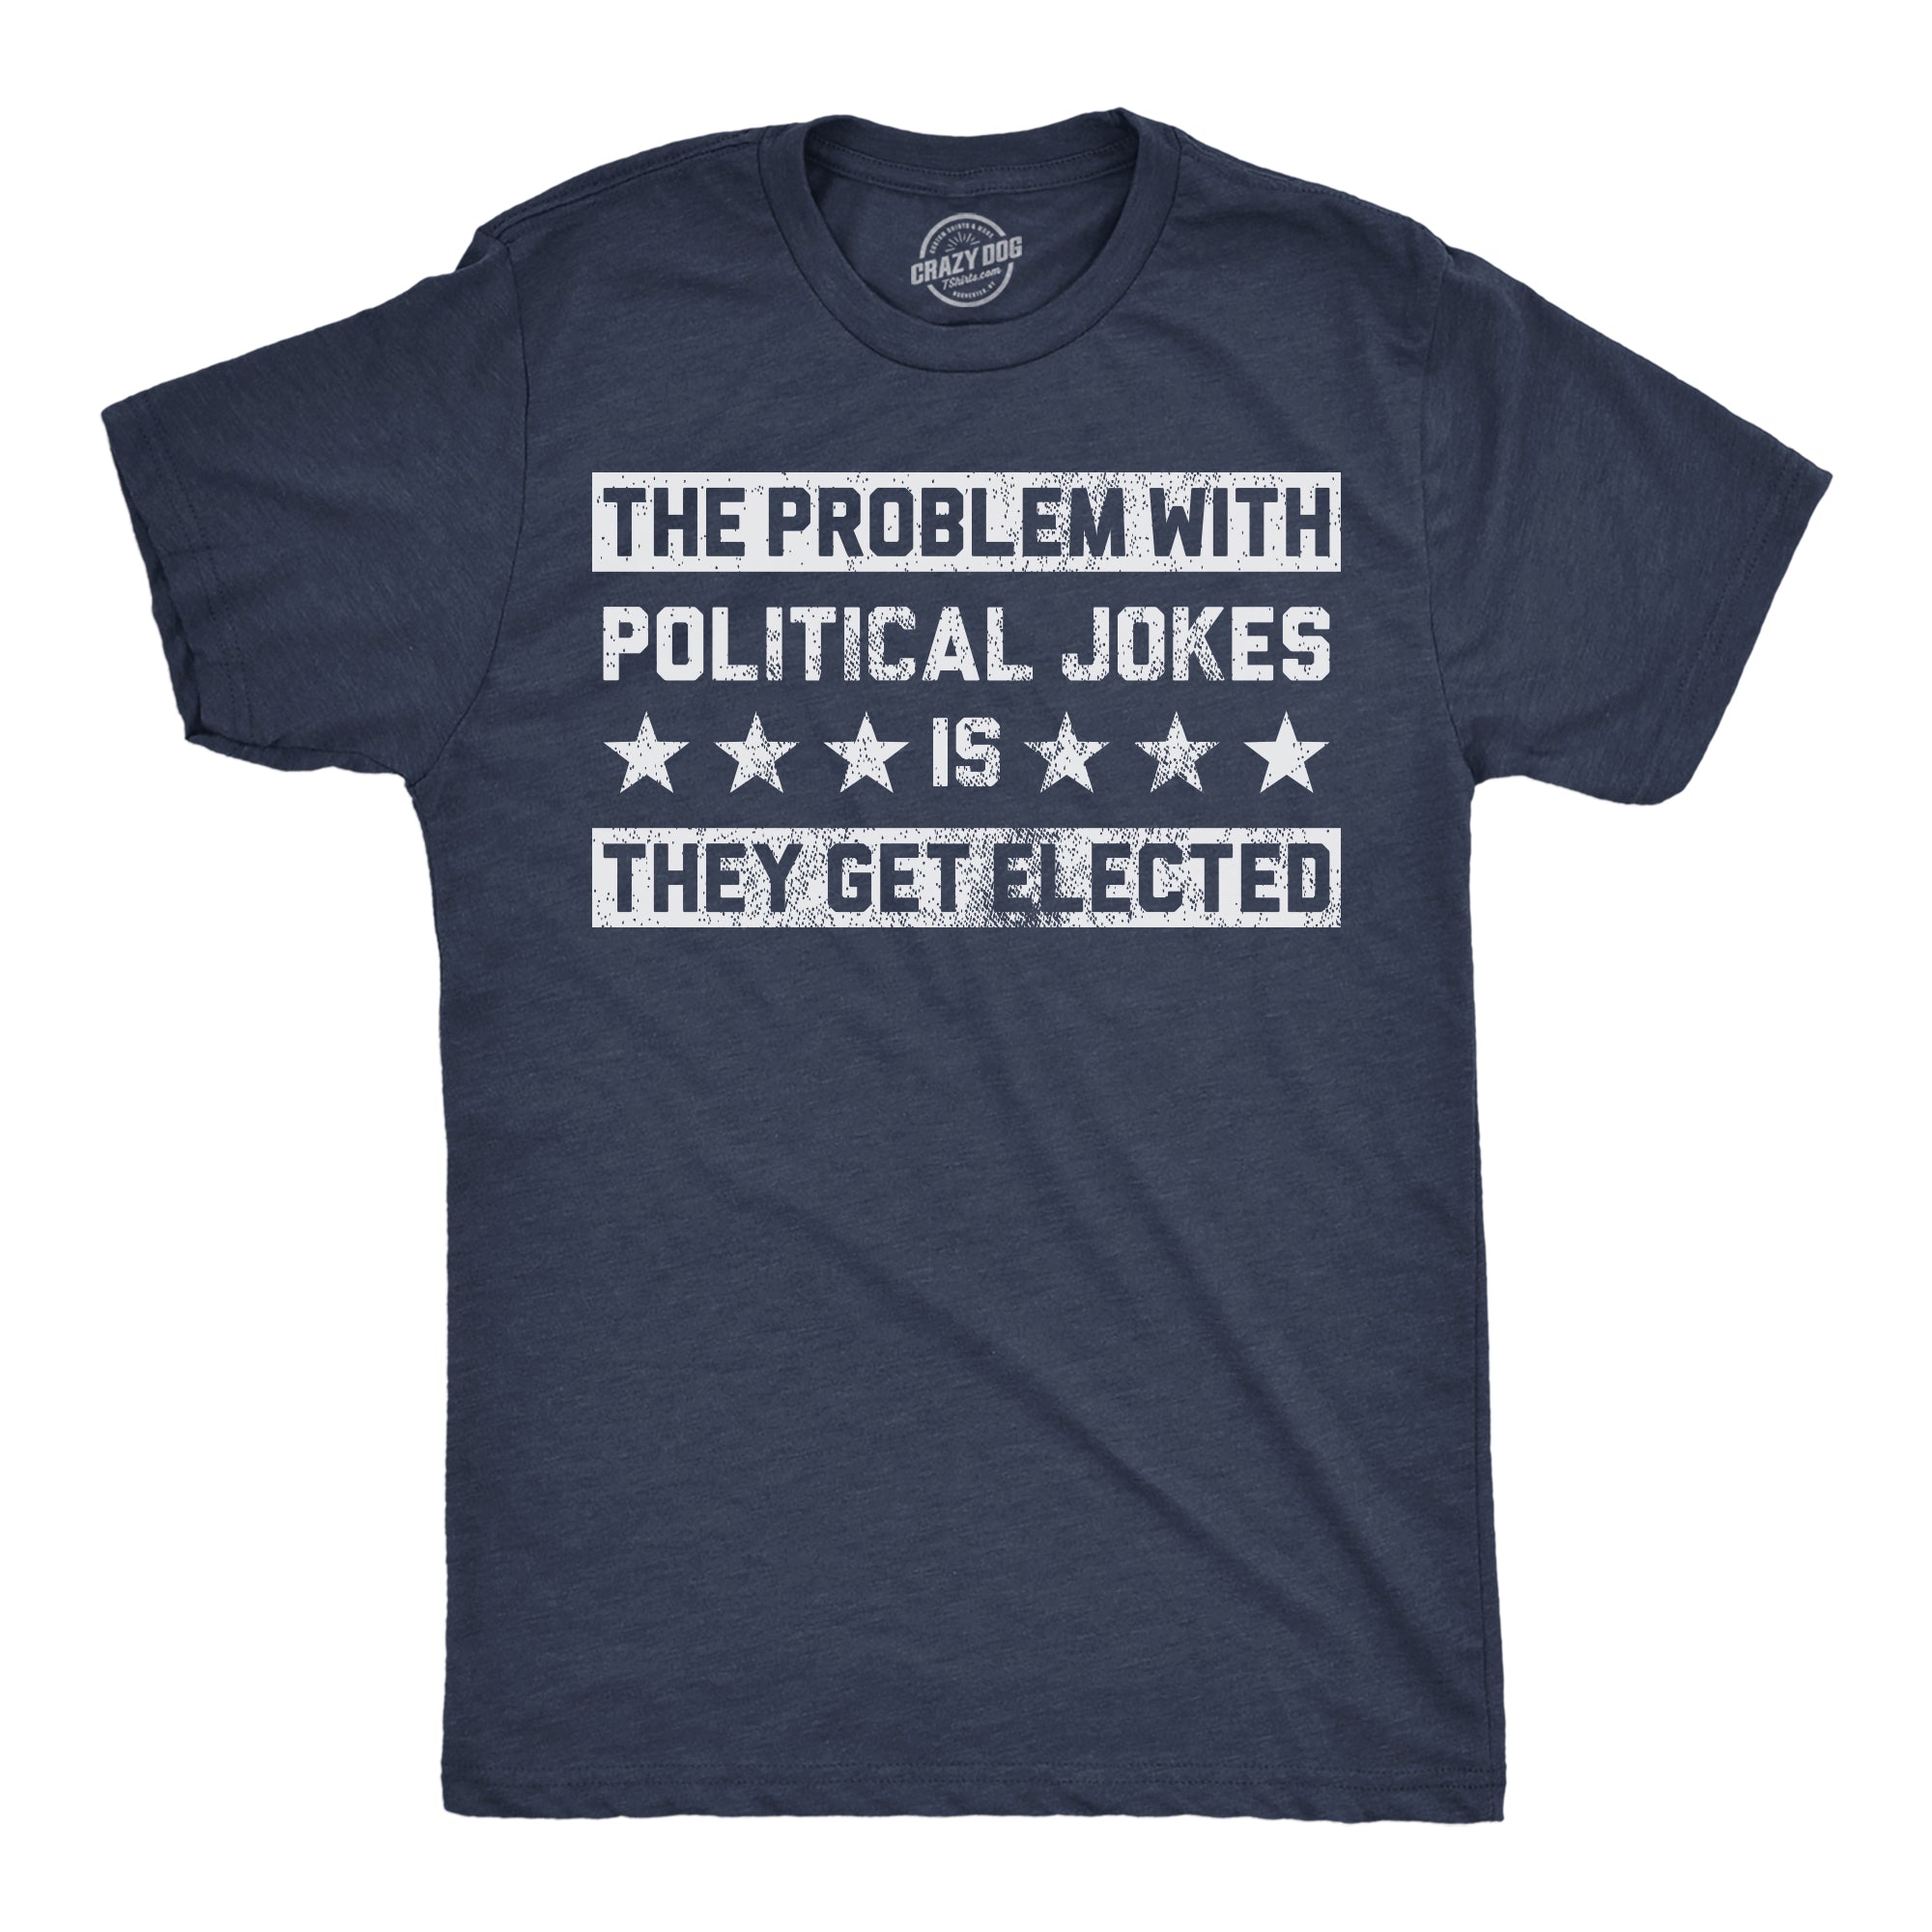 Funny Heather Navy - Political Jokes The Problem With Political Jokes Is They Get Elected Mens T Shirt Nerdy Political sarcastic Tee